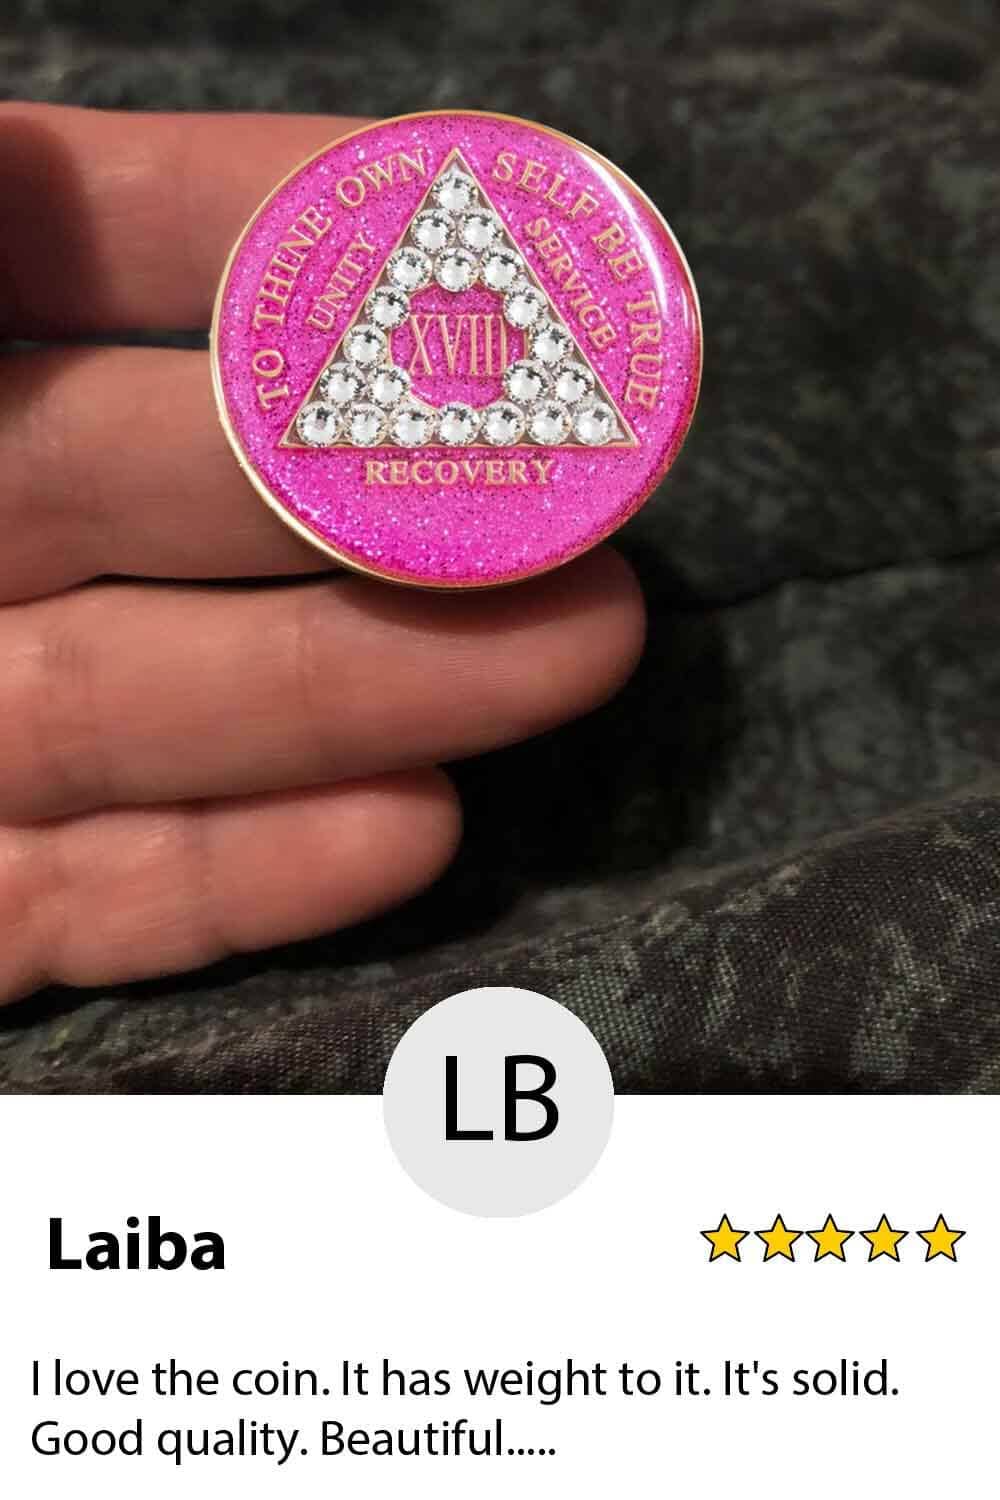 A pink coin with diamonds on it is held in someone 's hand.